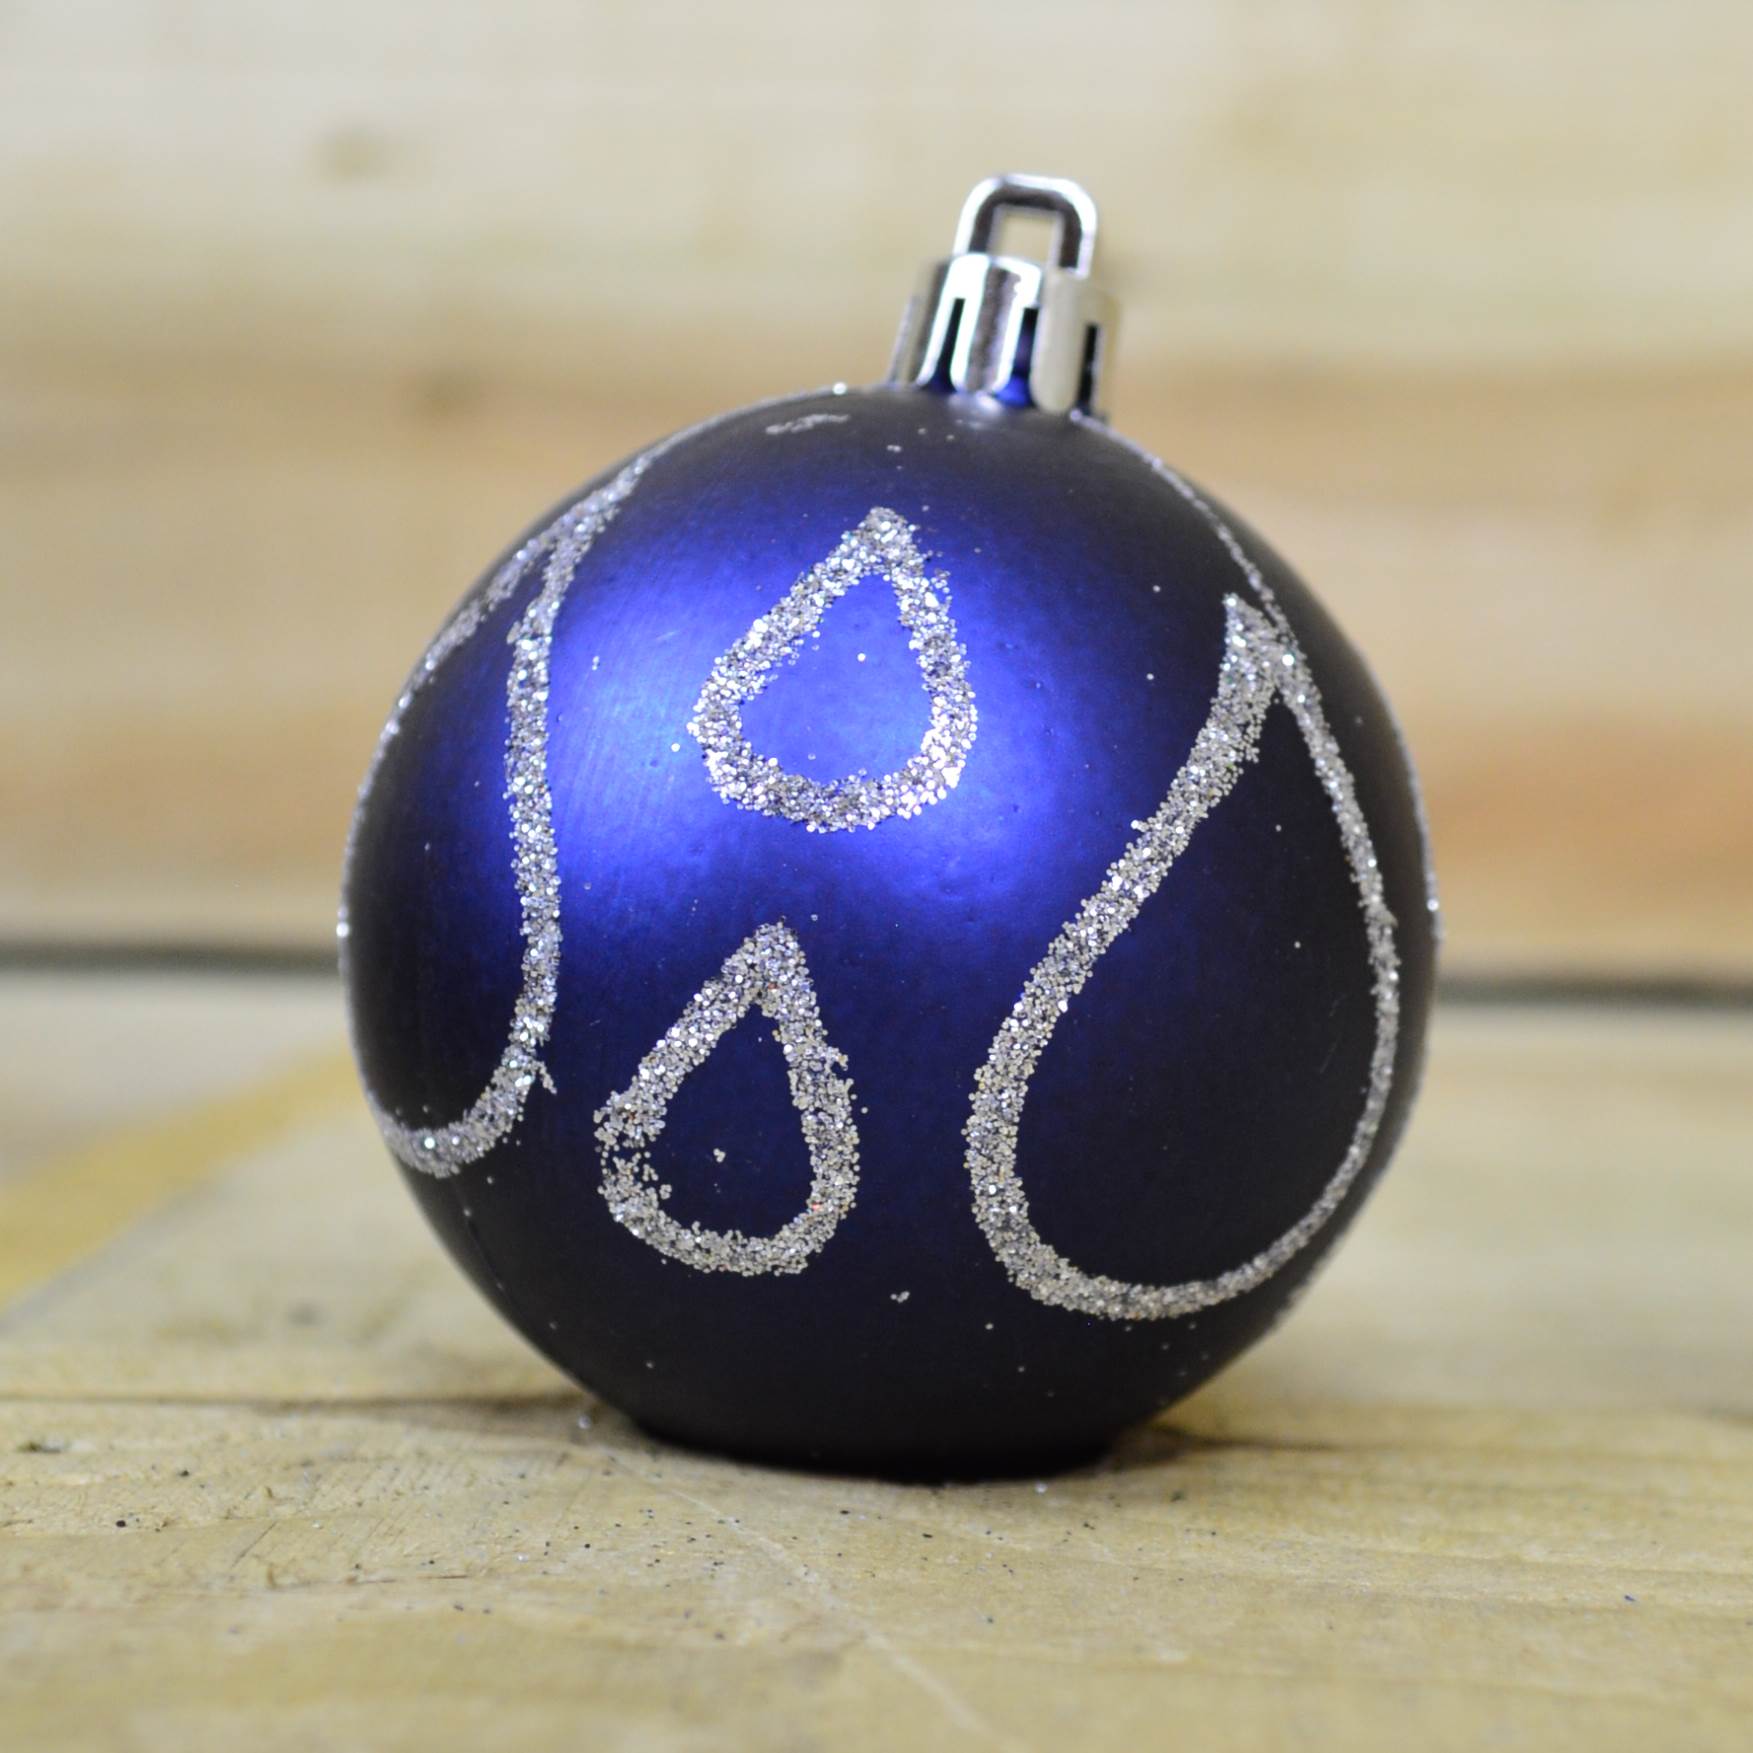 9 Pack Premier 60mm Deluxe Glitter Christmas Tree Baubles - Midnight Blue